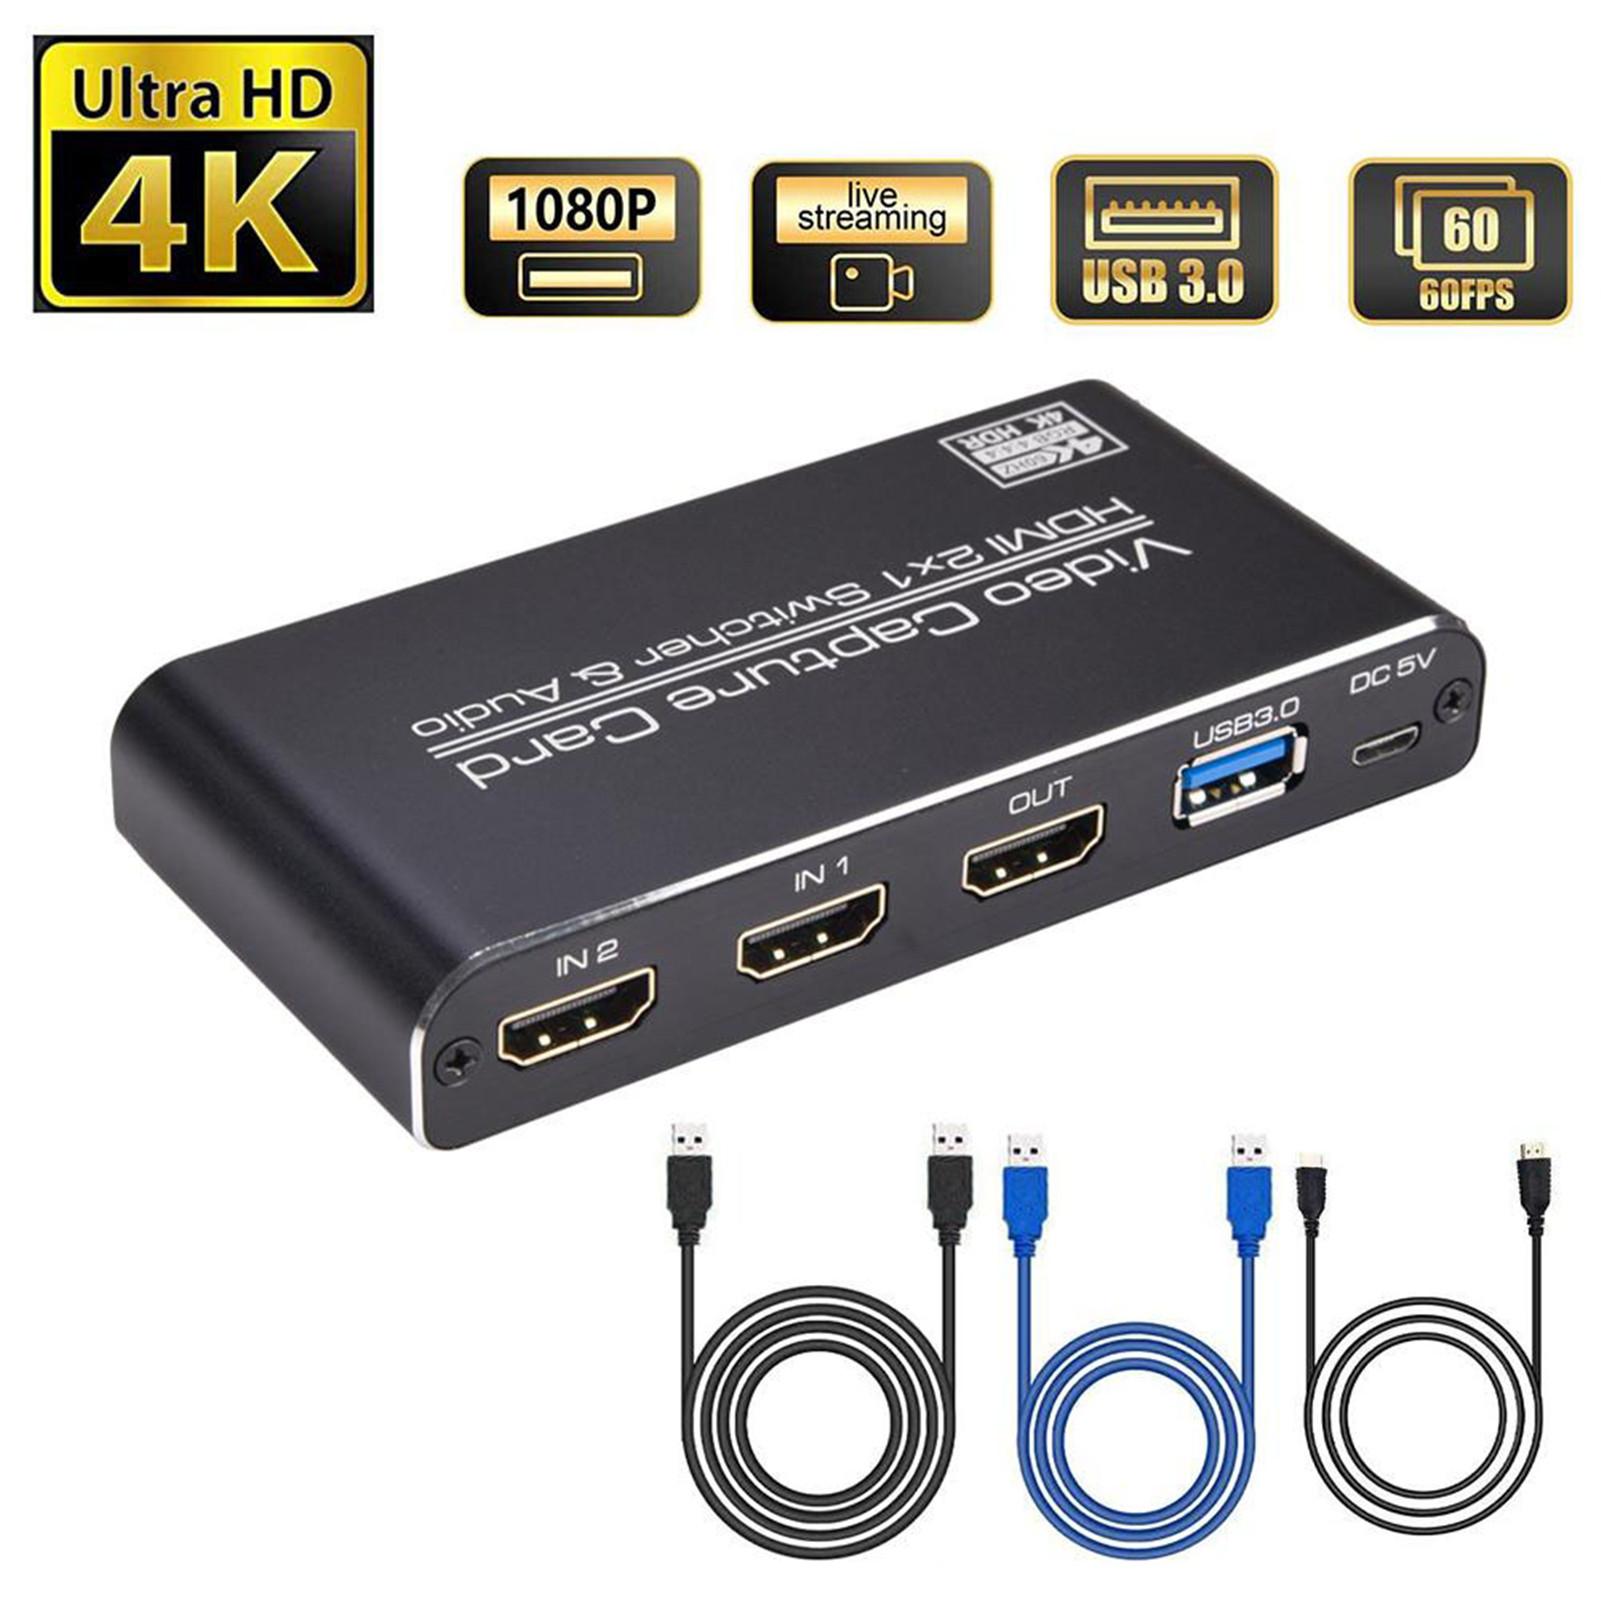 HD 1080P 4K HDMI Video Capture Card HDMI To USB 2.0 Video Capture Board Game Record Live Streaming Broadcast Local Loop Out